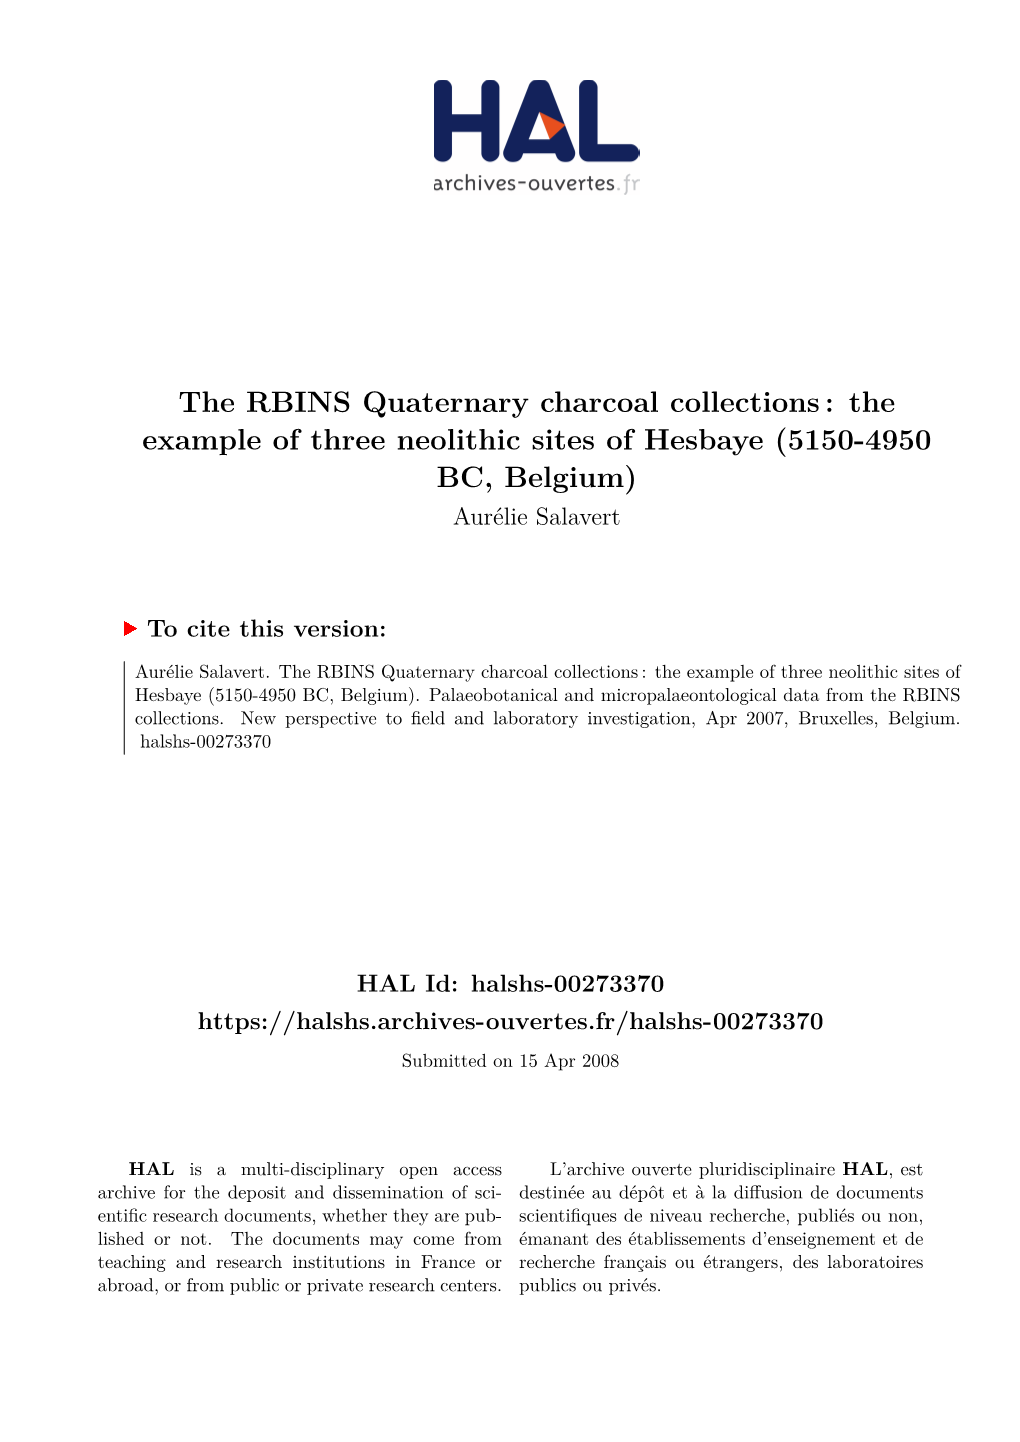 The RBINS Quaternary Charcoal Collections: the Example